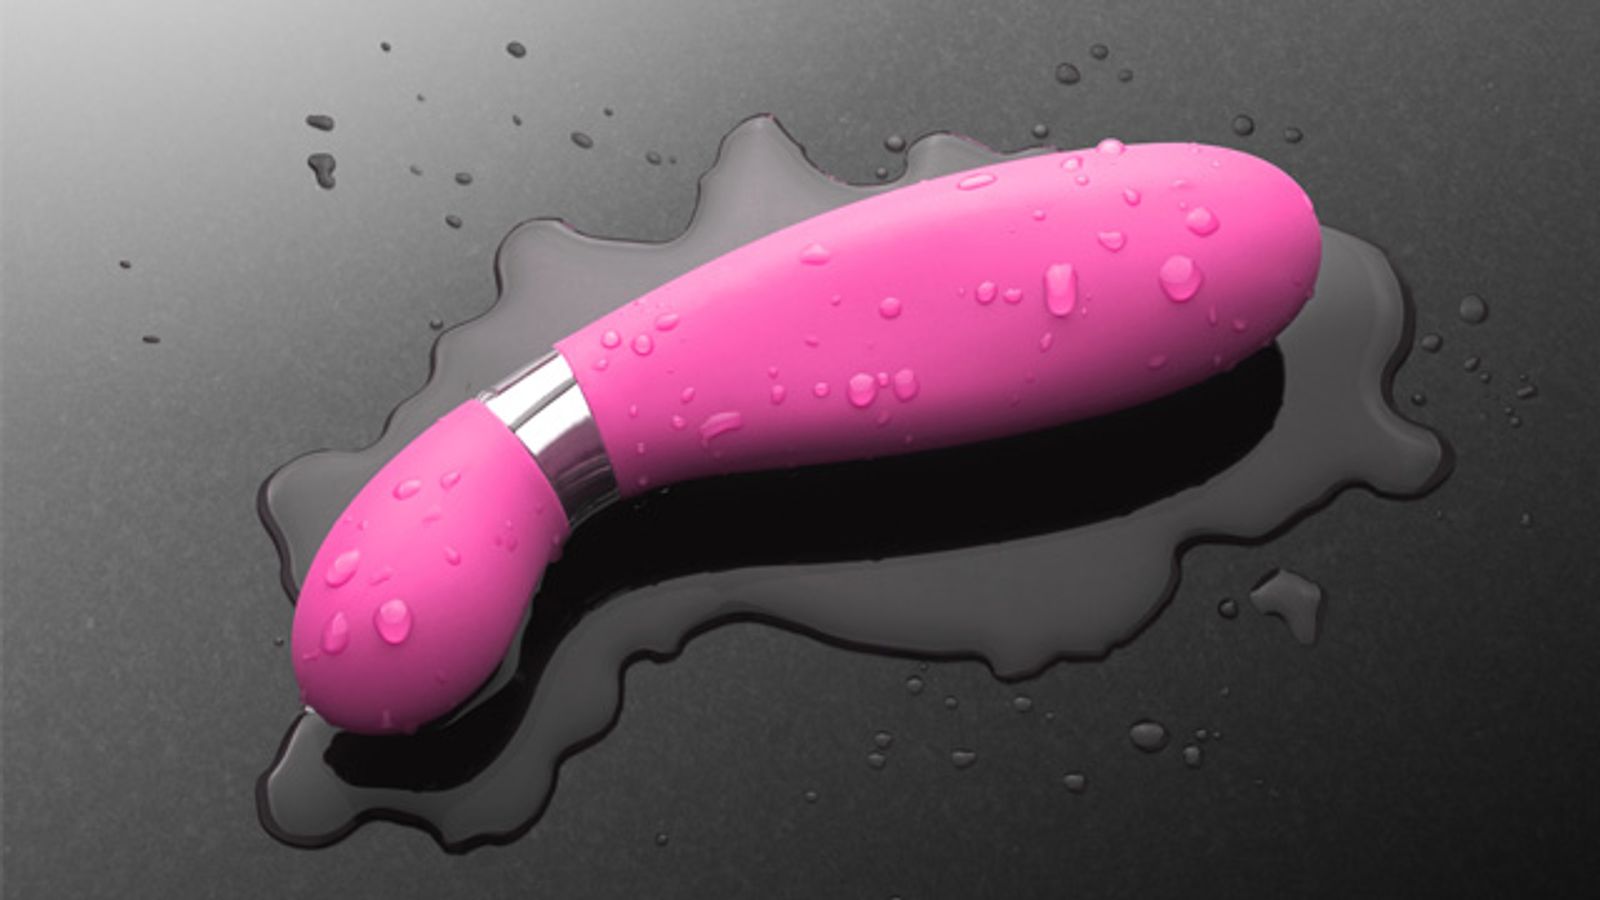 Jimmyjane Launches 3rd Generation of Form 6 Vibrator